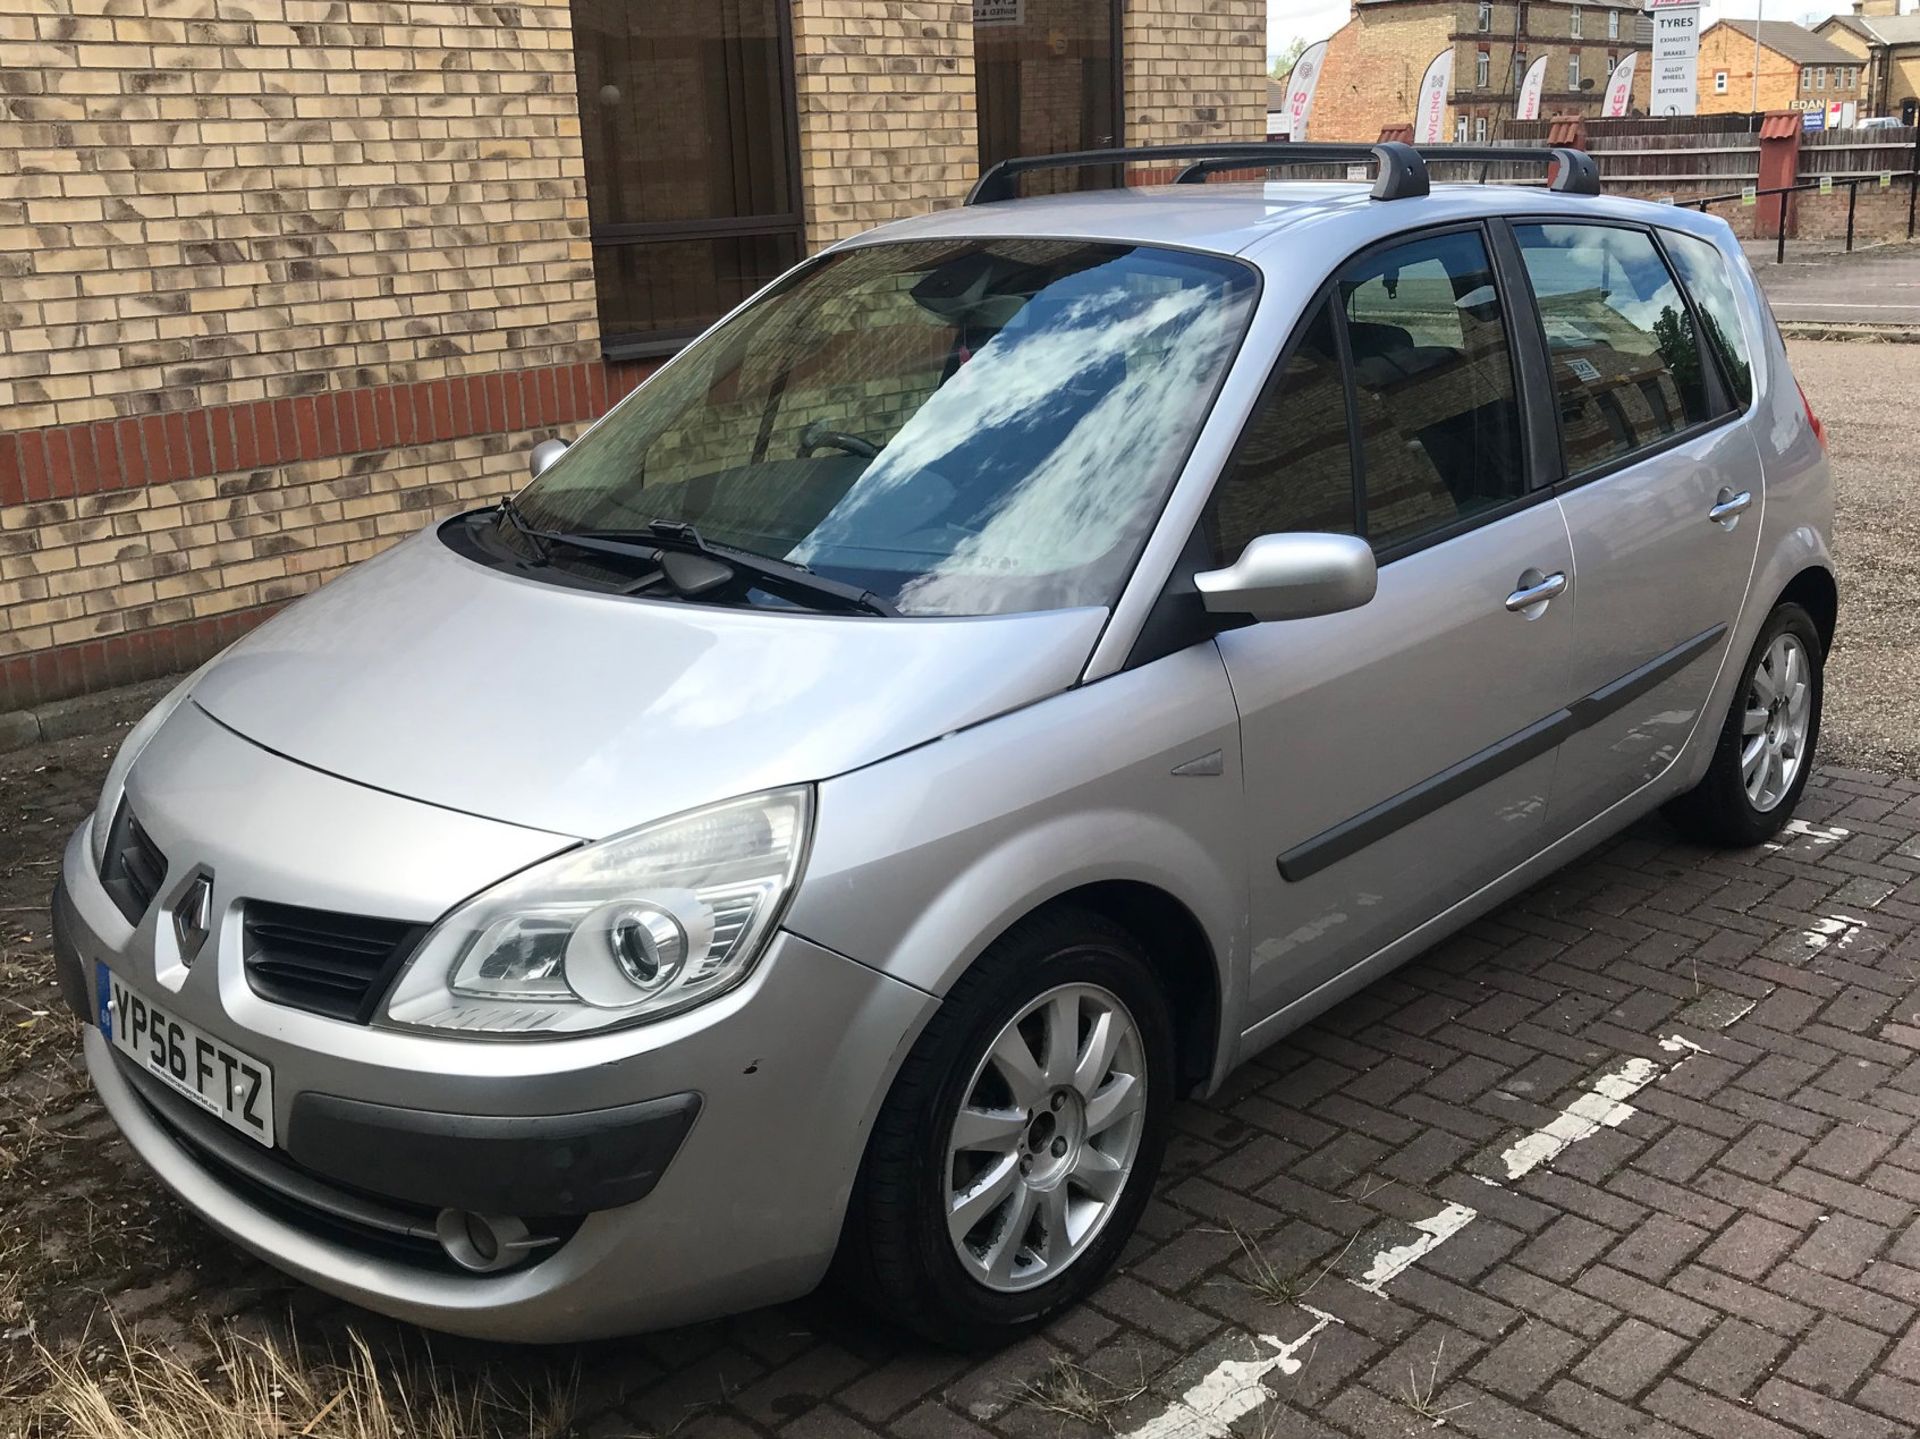 2006 Renault Scenic 1.6 VVT Dynamiq 5 Dr MPV - CL505 - NO VAT ON THE HAMMER - Location: Corby, Nort